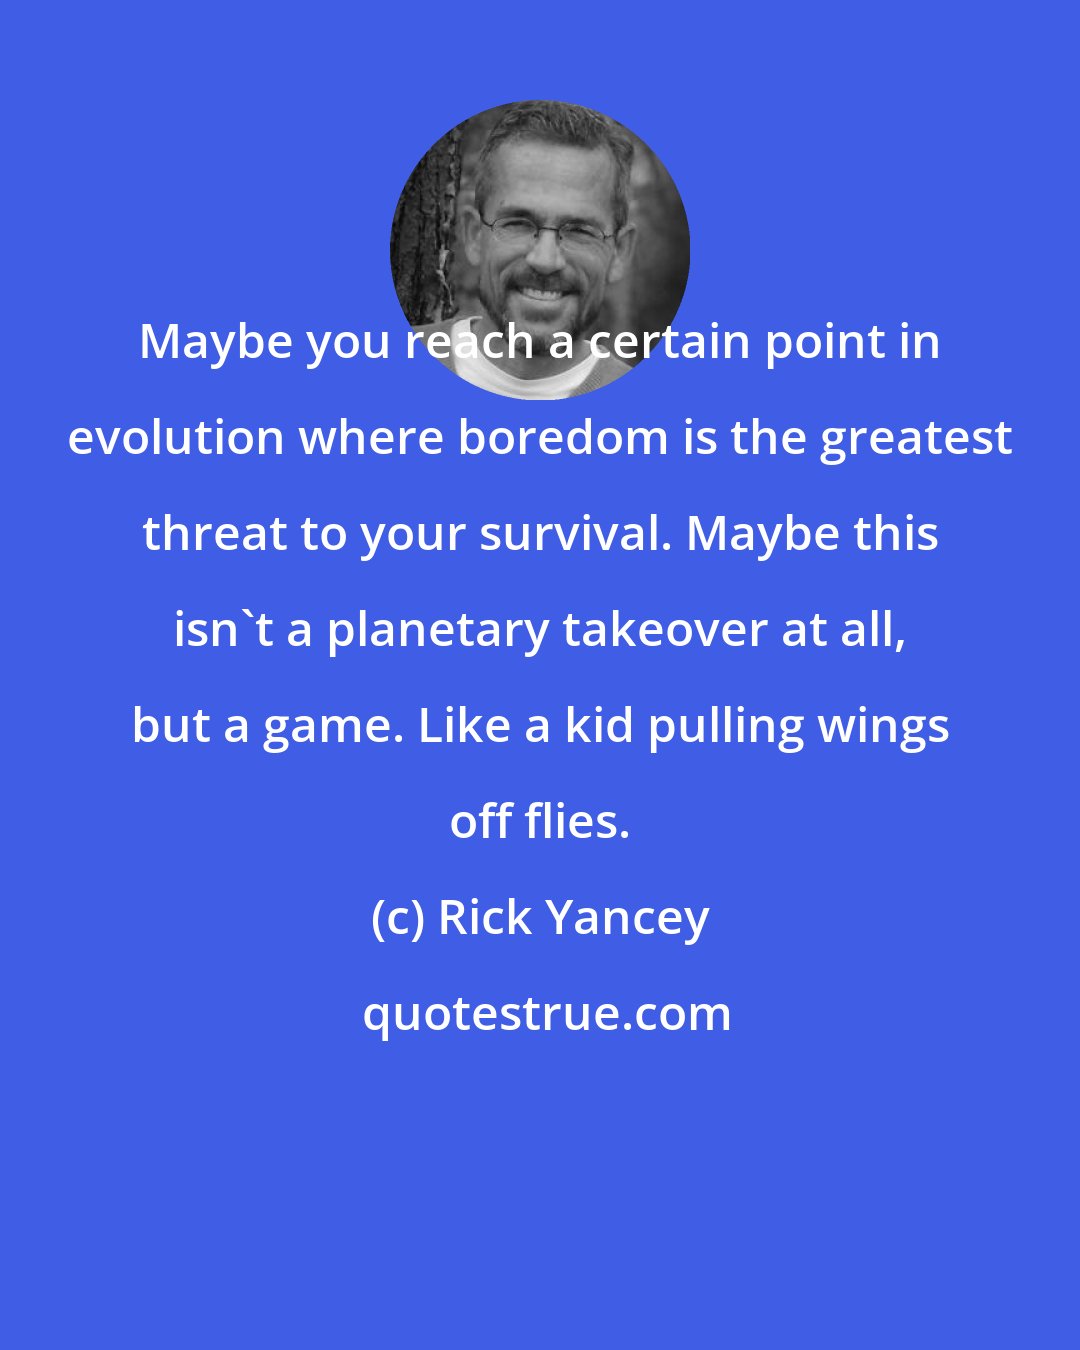 Rick Yancey: Maybe you reach a certain point in evolution where boredom is the greatest threat to your survival. Maybe this isn't a planetary takeover at all, but a game. Like a kid pulling wings off flies.